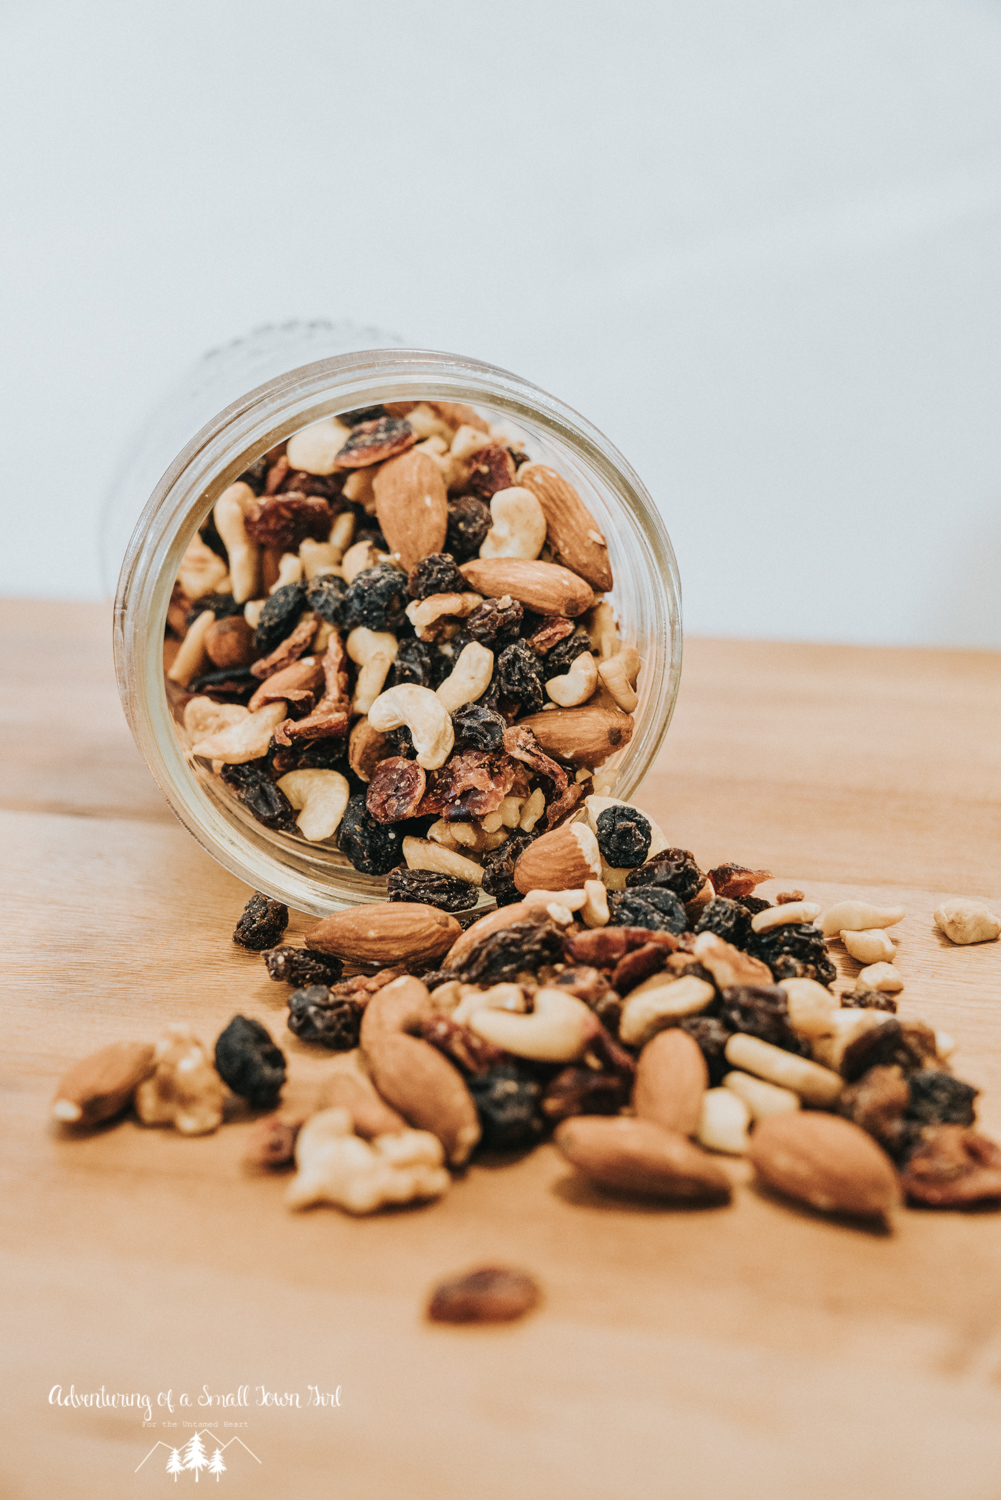 Homemade Trail Mix Recipe by Adventuring of a Small Town Girl (ASTG) - No Bake Raw Vegan Trail Mix - Make your own trail mix-4.jpg